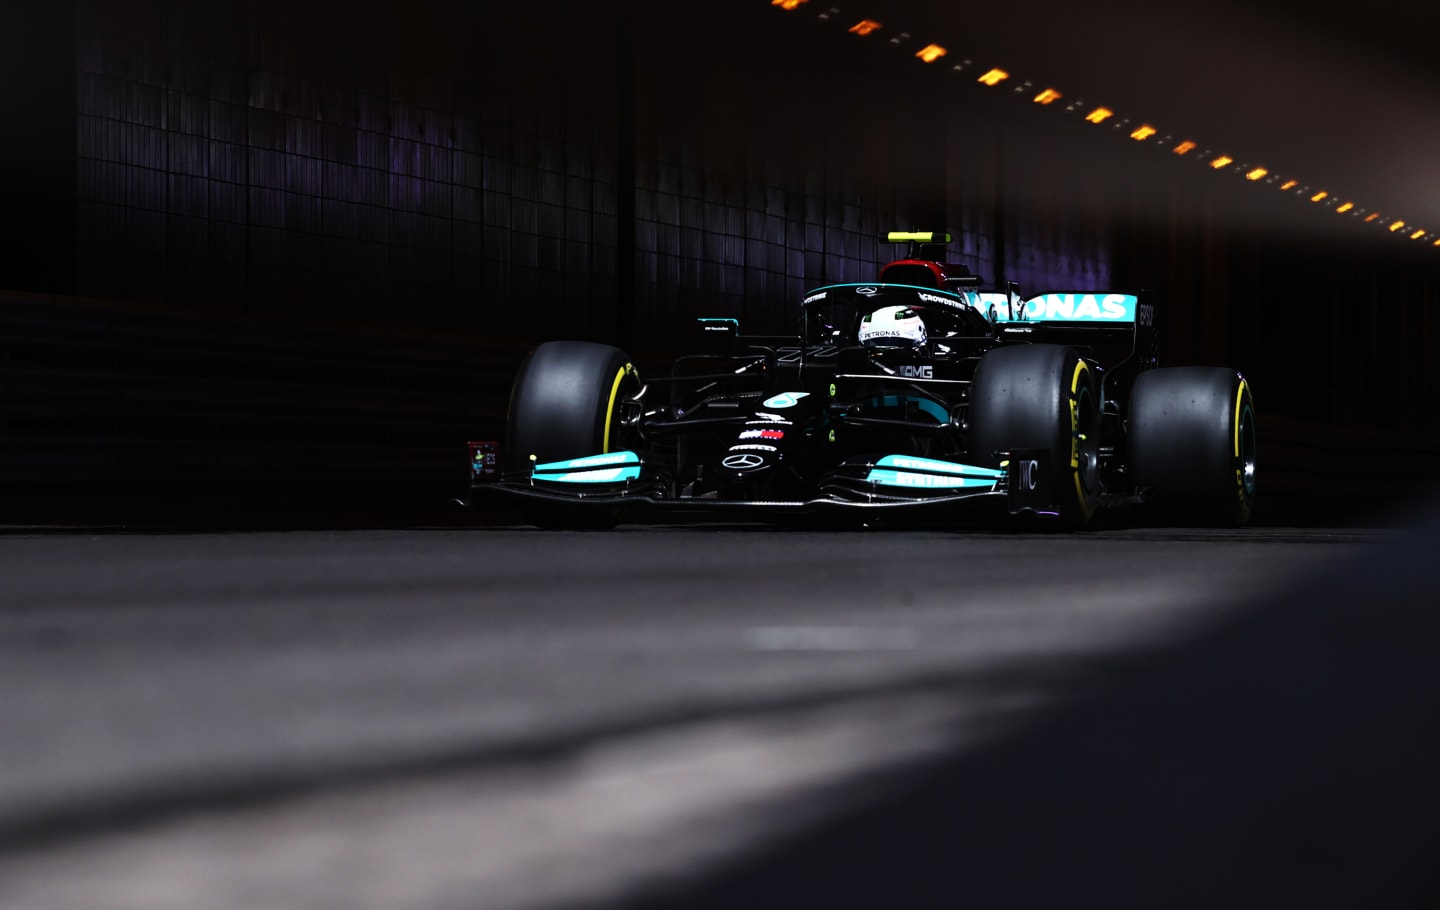 MONTE-CARLO, MONACO - MAY 20: Valtteri Bottas of Finland driving the (77) Mercedes AMG Petronas F1 Team Mercedes W12 on track during practice ahead of the F1 Grand Prix of Monaco at Circuit de Monaco on May 20, 2021 in Monte-Carlo, Monaco. (Photo by Lars Baron/Getty Images)